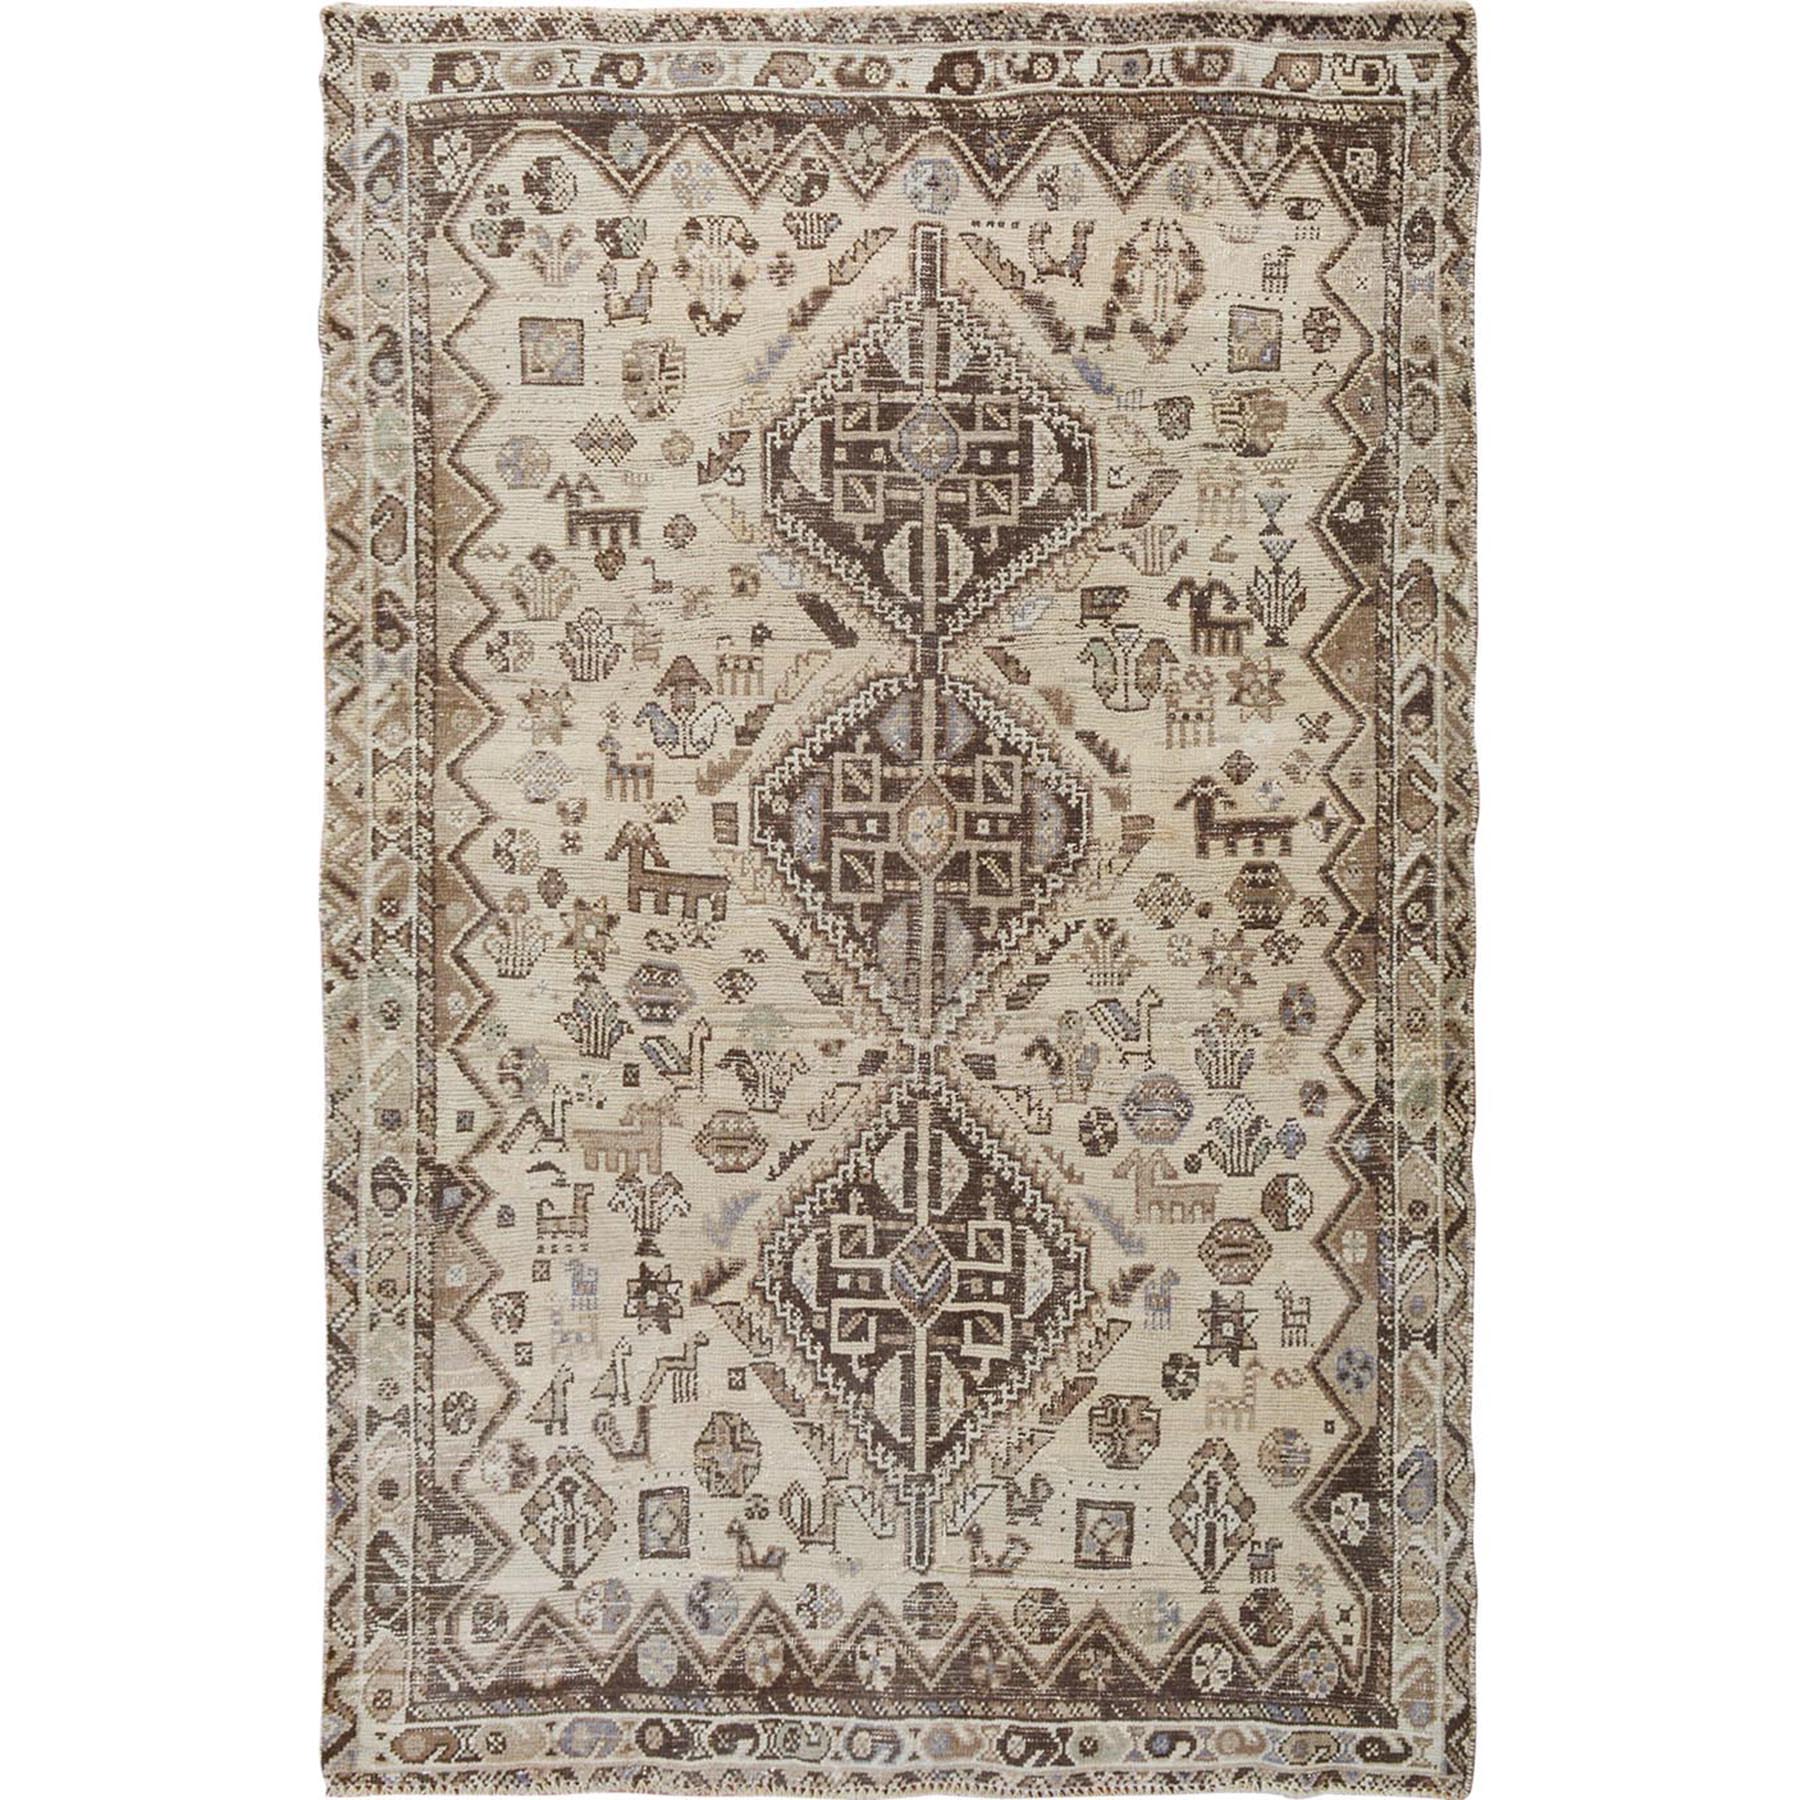 5'2"X7'3" Beige Old And Worn Down Persian Qashqai Pure Wool Hand Knotted Oriental Rug moae7bc8